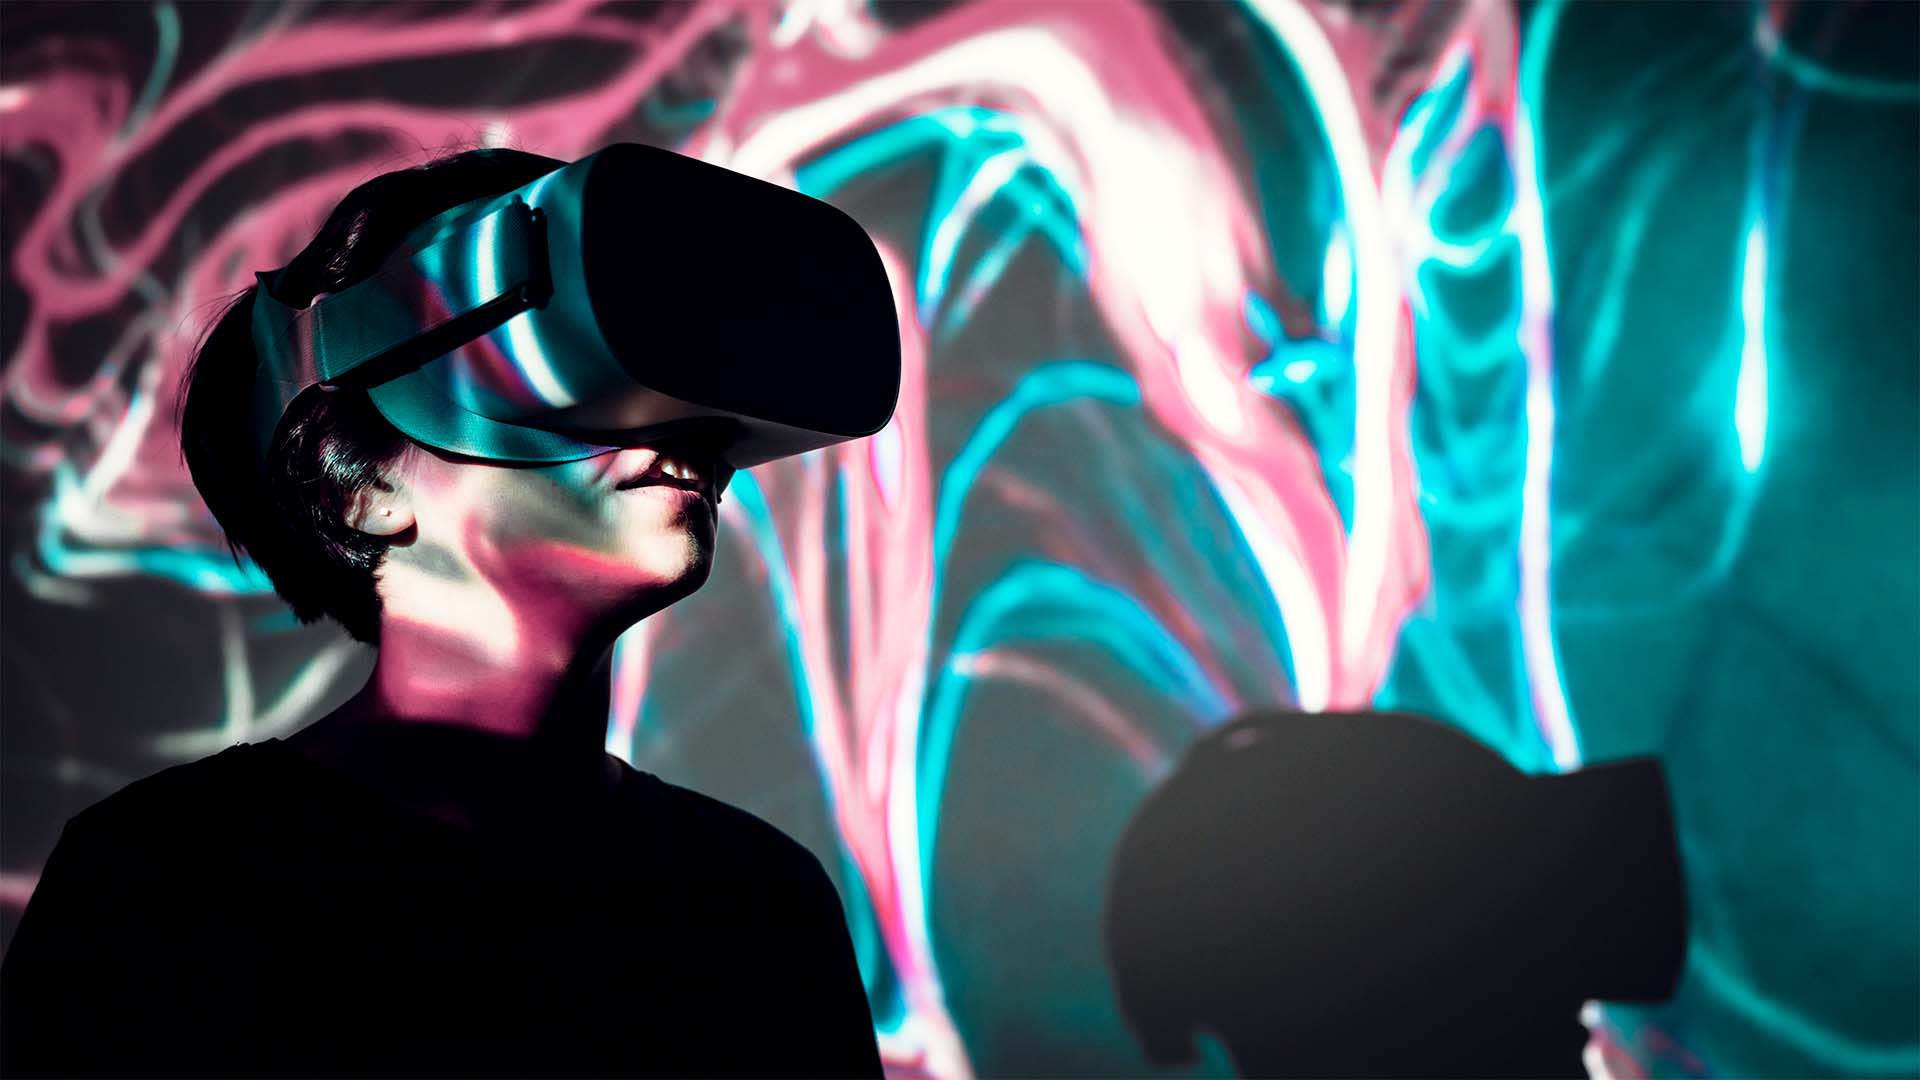 The Metaverse and Its Potential - A Beginner's Guide to Virtual Reality